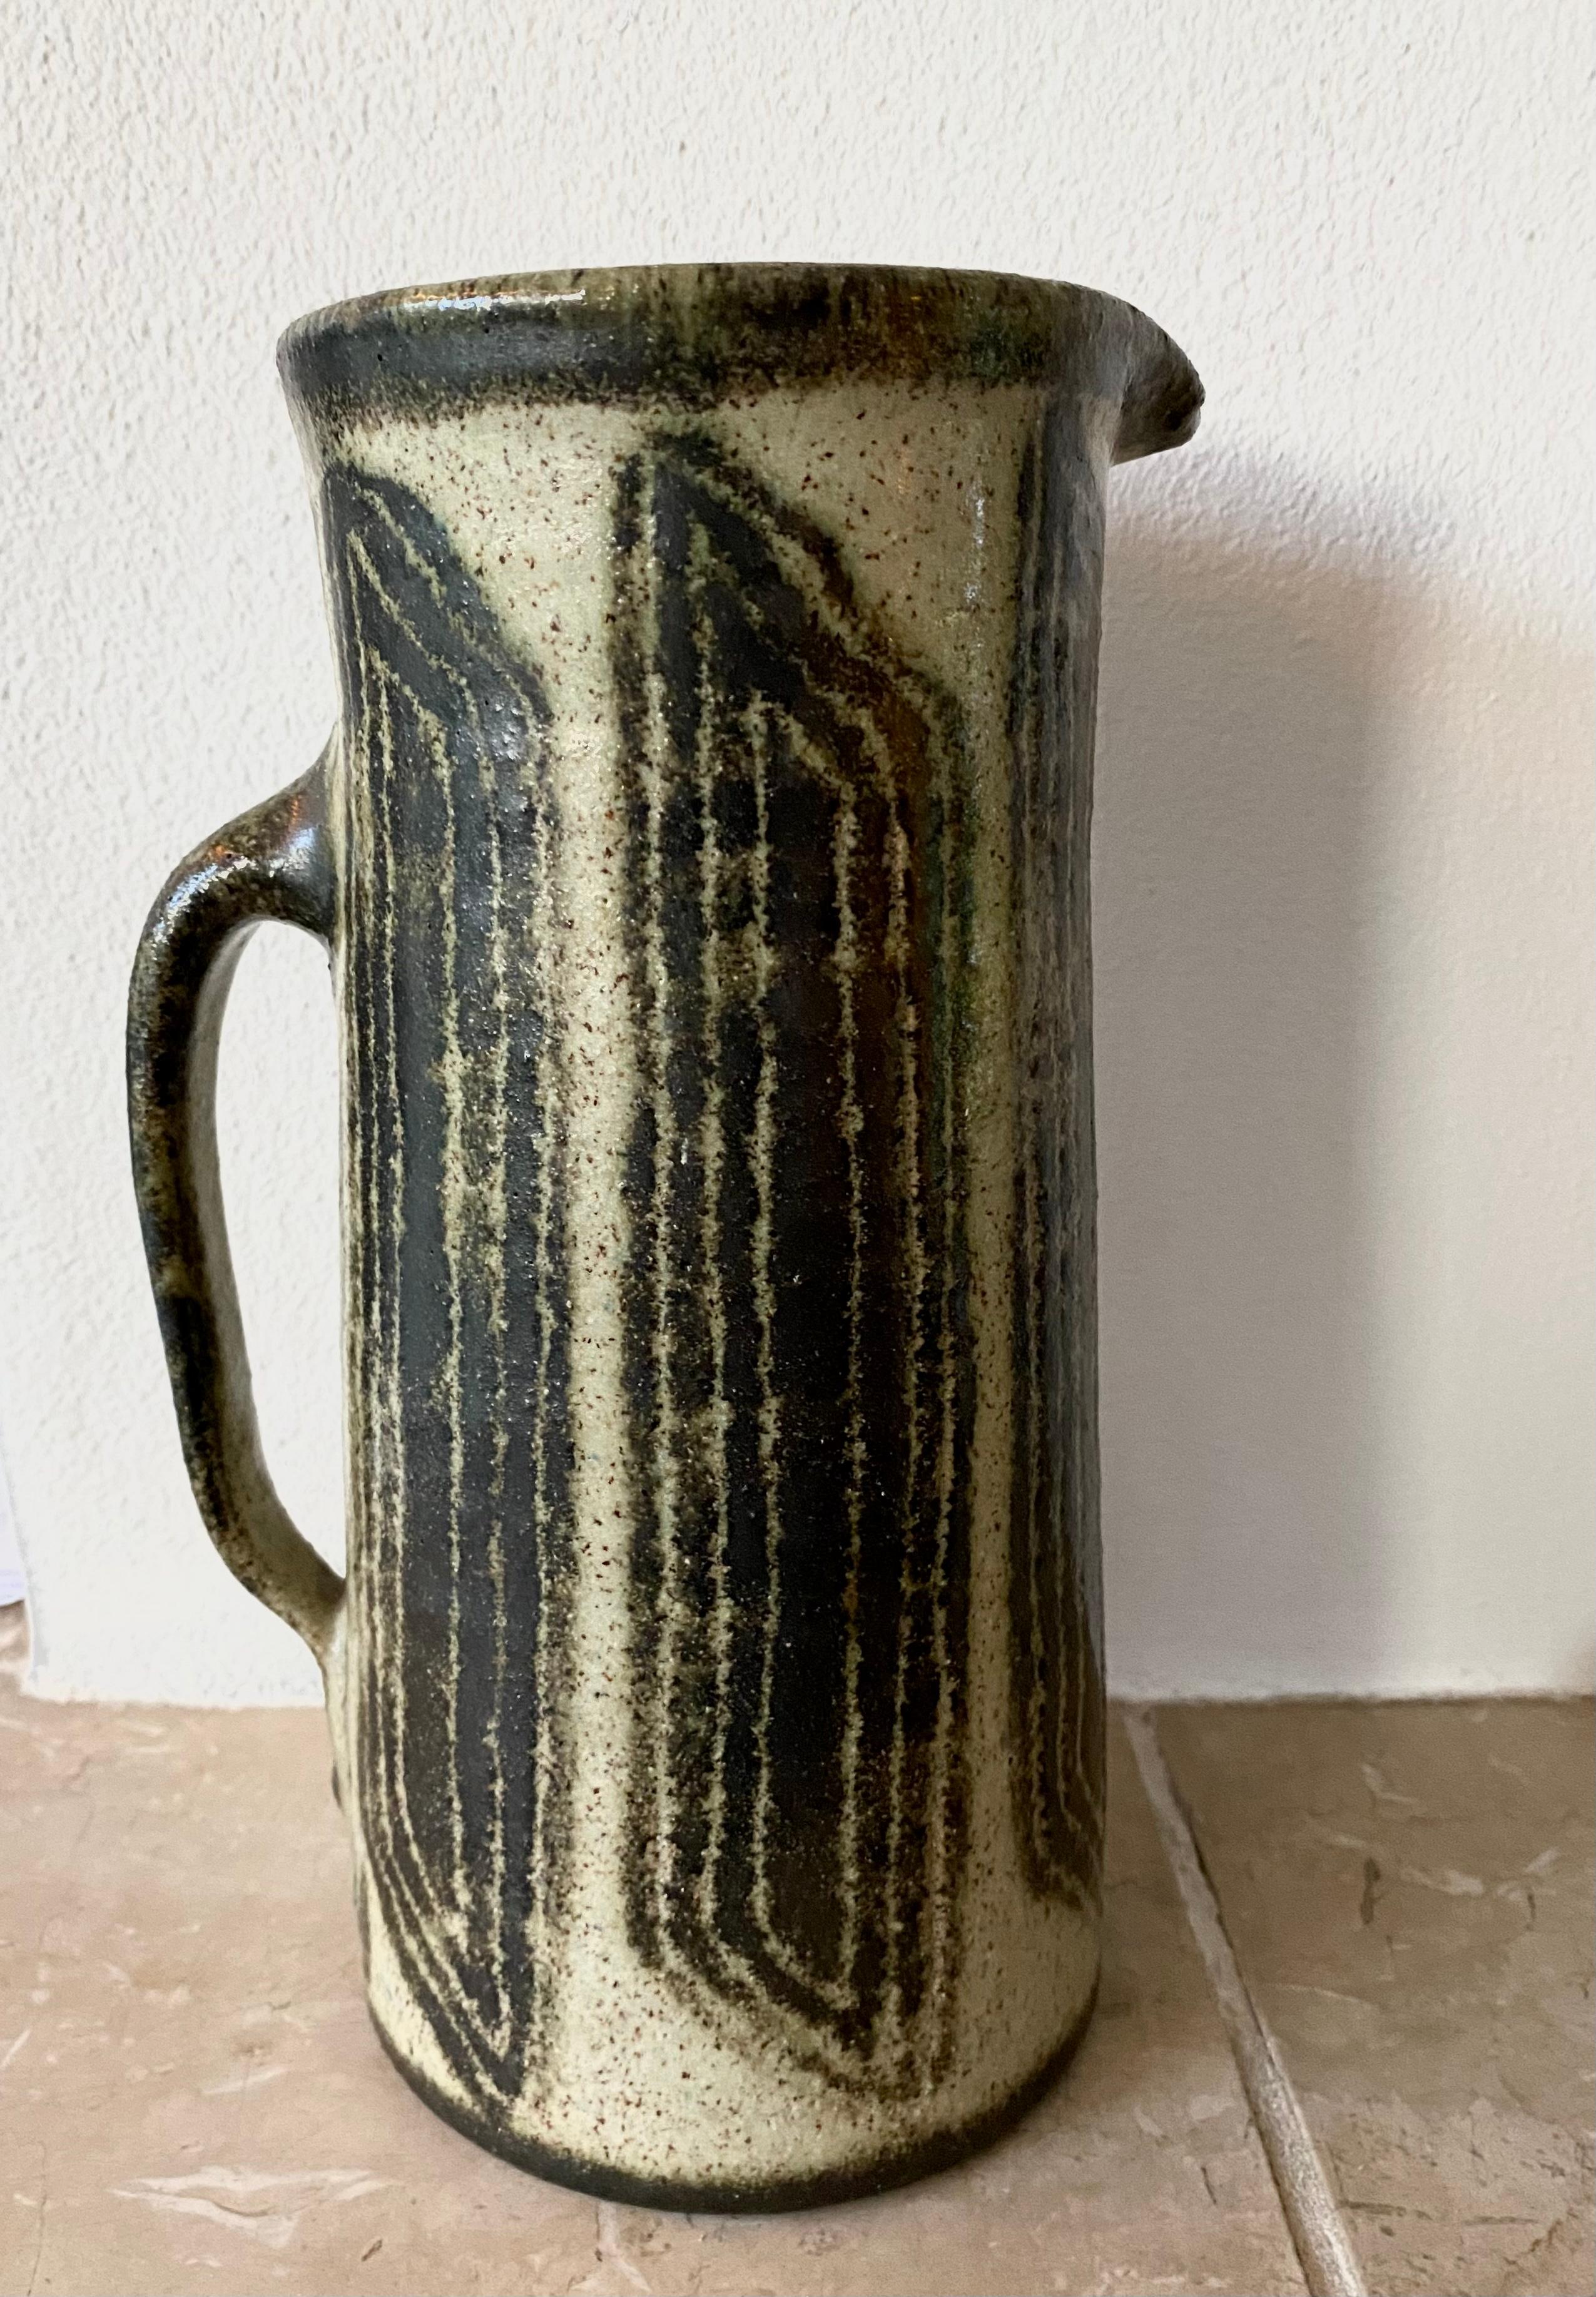 Stunning Glazed Ceramic Pitcher, Vase, with Brutalist, Abstract decoration. This stunning piece was made by the Dutch Artist Han Cornelissen, who was a student of Jan van Stolk. The piece remains in very good condition, with normal signs of age and